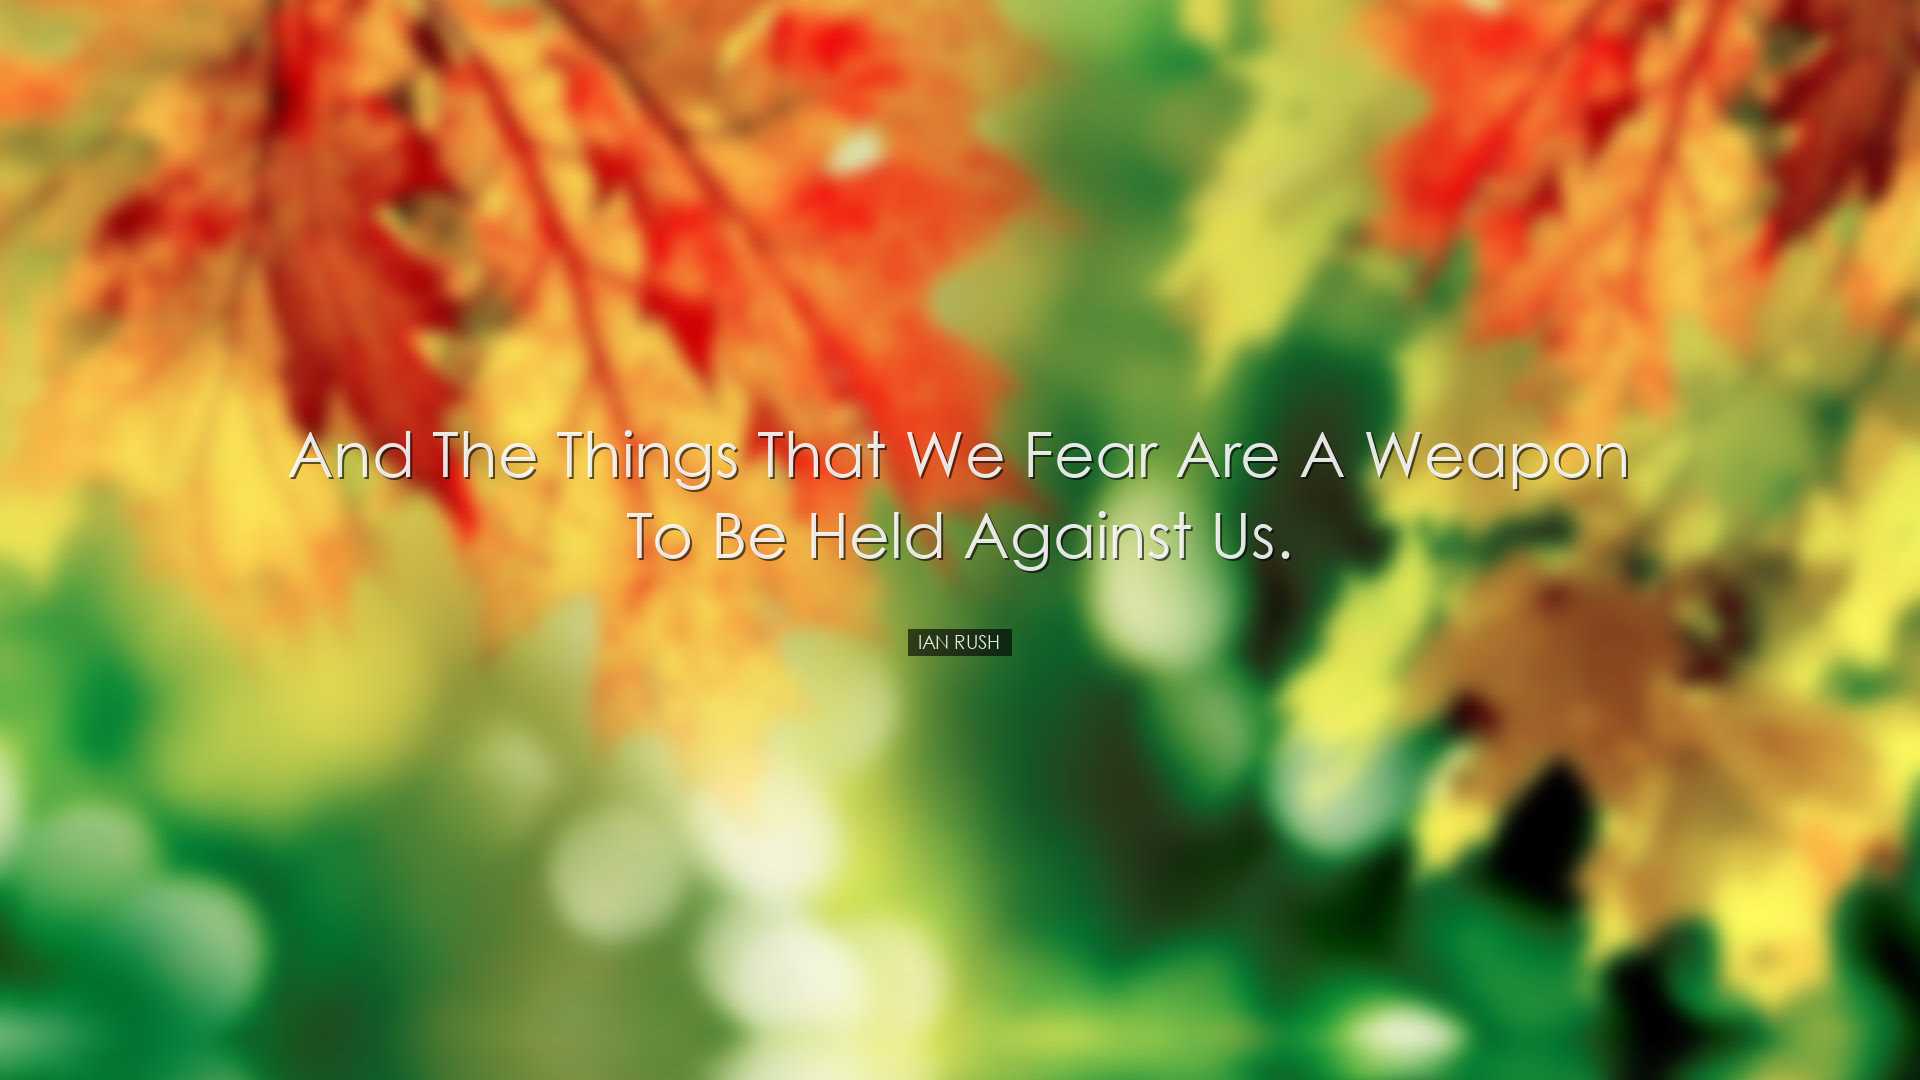 And the things that we fear are a weapon to be held against us. -